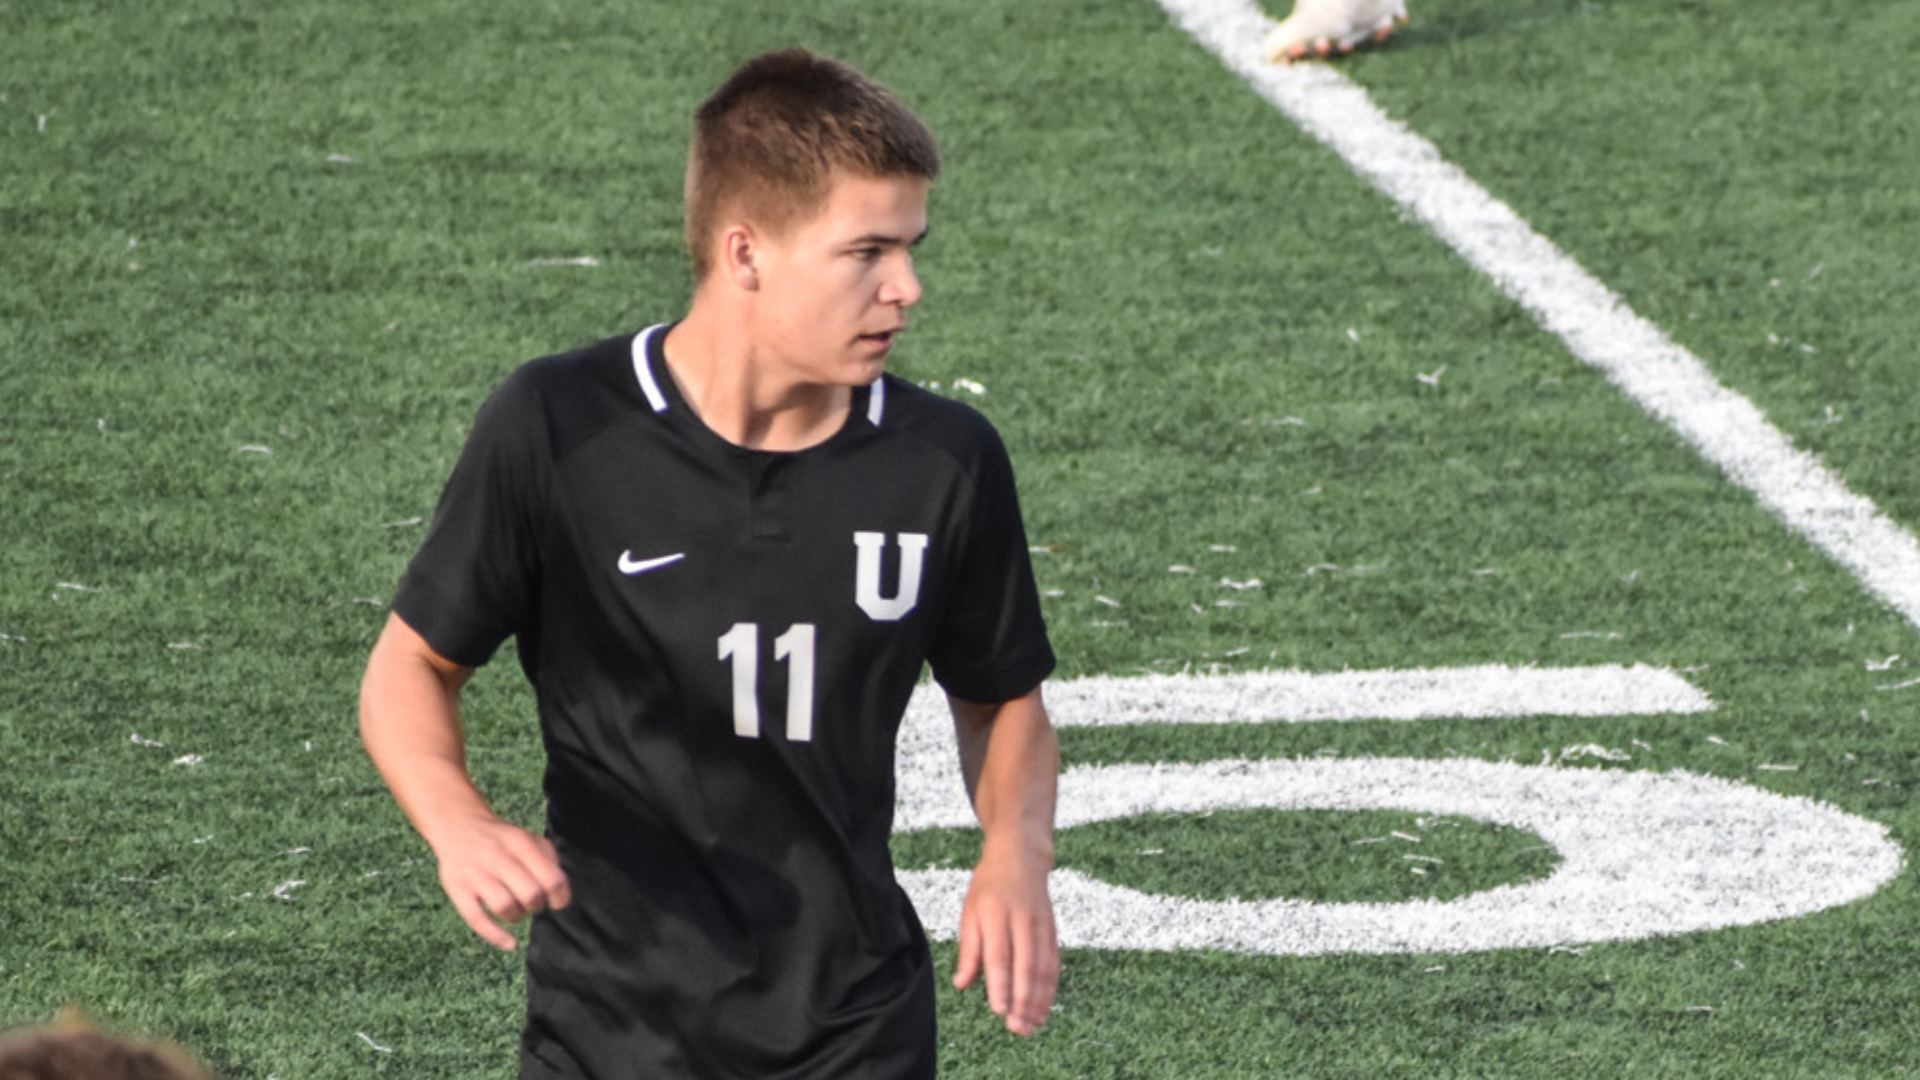 No. 15 Union wins 6-0 at Pikeville as the Bulldogs remain undefeated